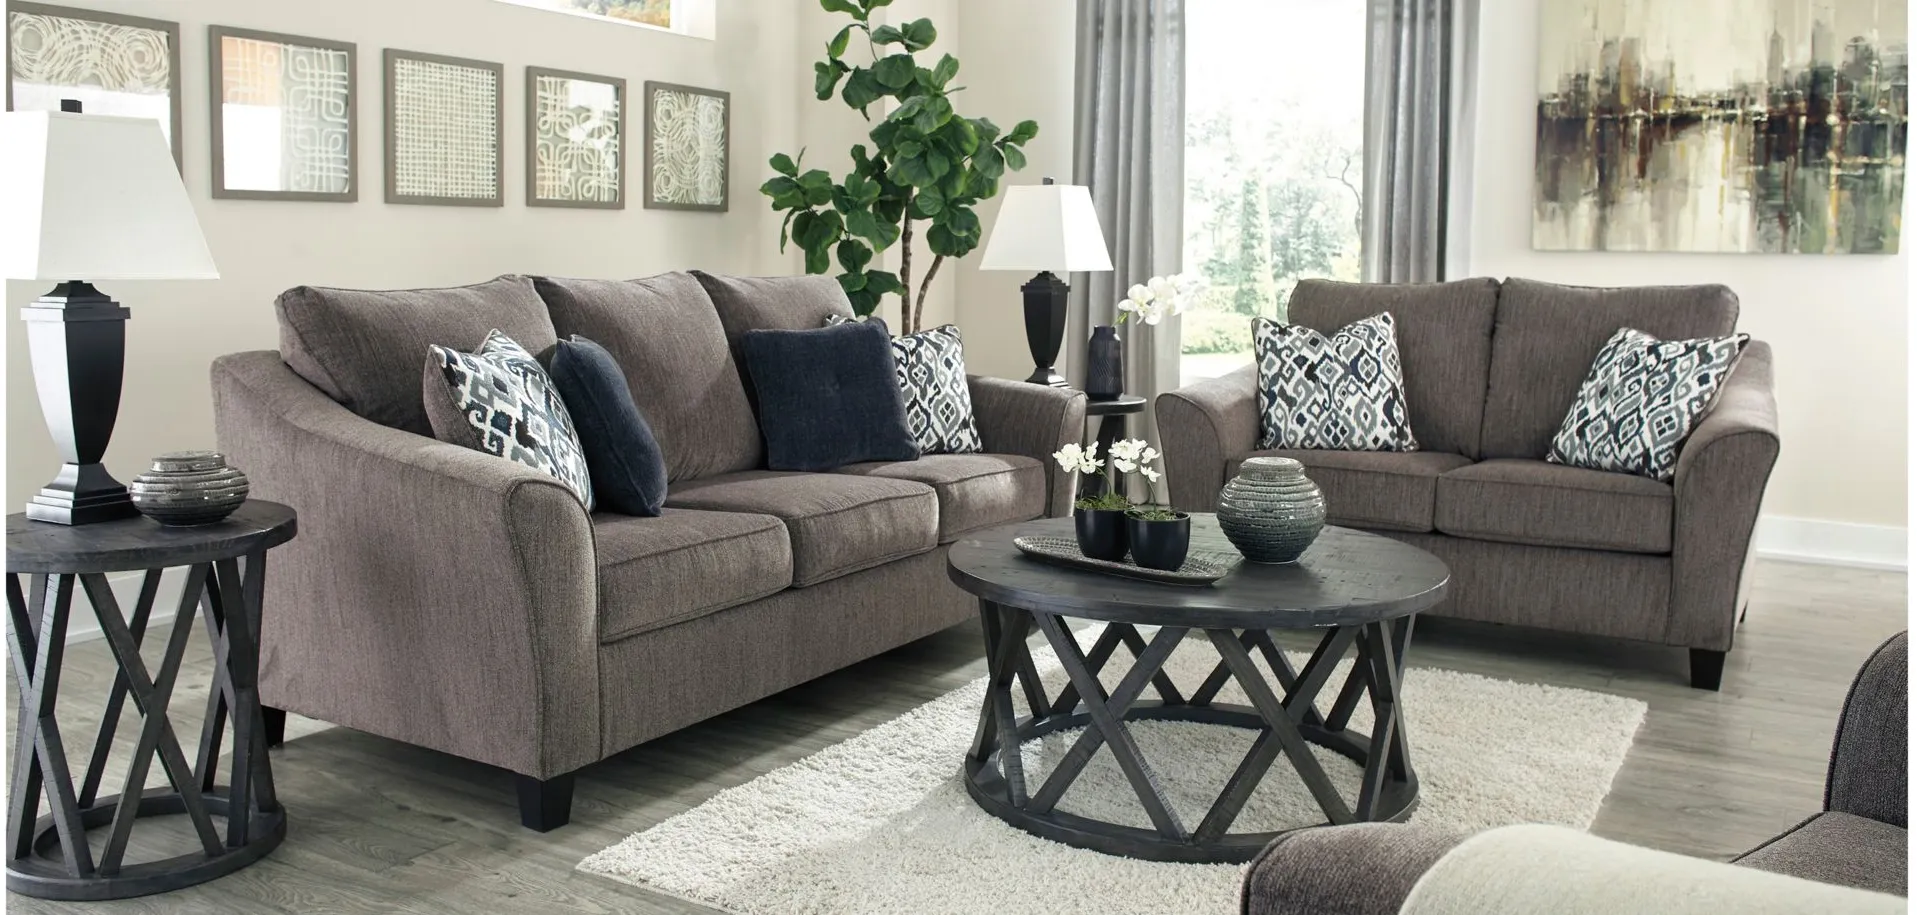 Sanderson 2-pc.. Sofa and Loveseat Set in Slate by Ashley Furniture